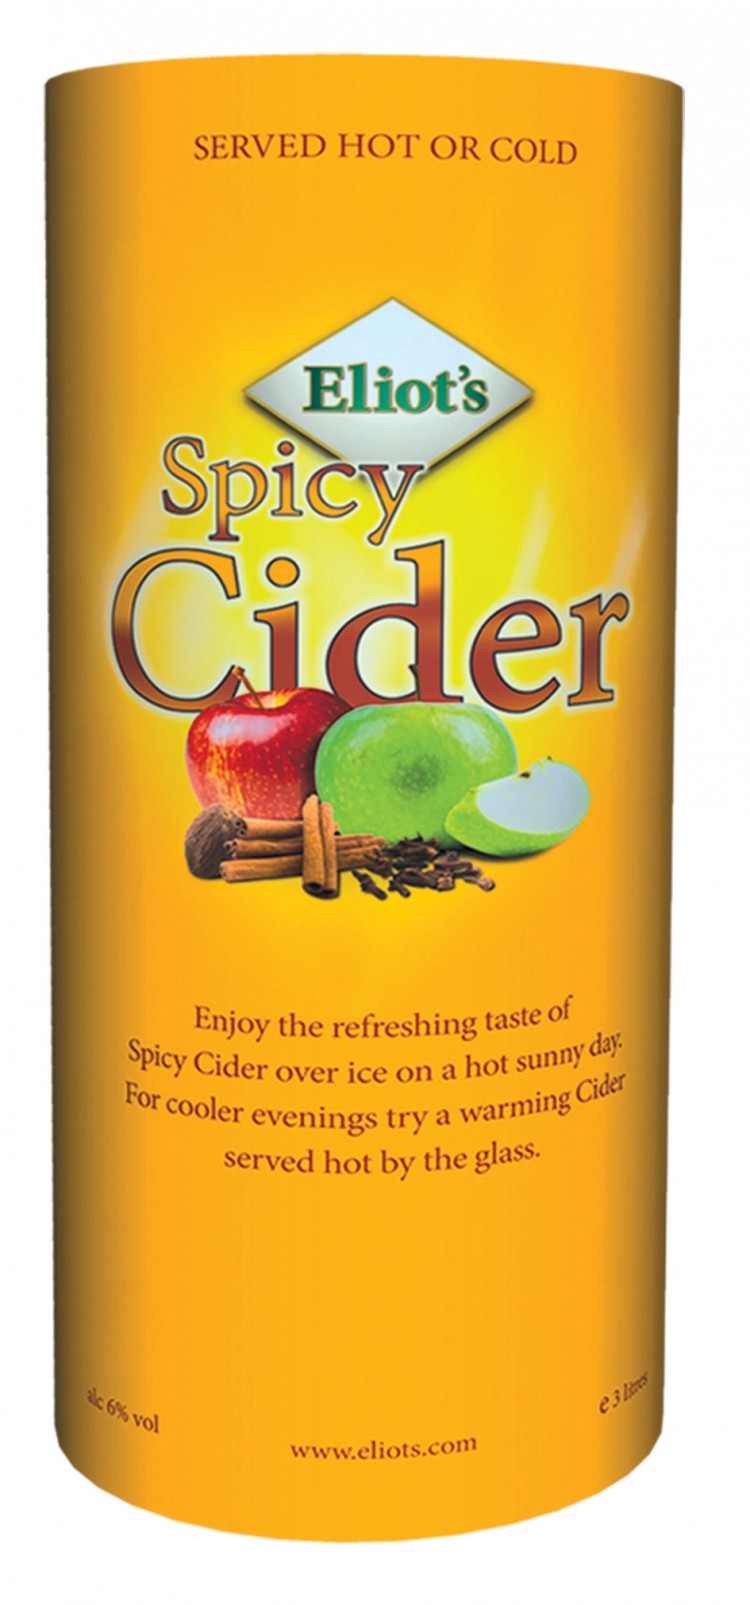 Eliots Spicy Cider: can be served hot or cold